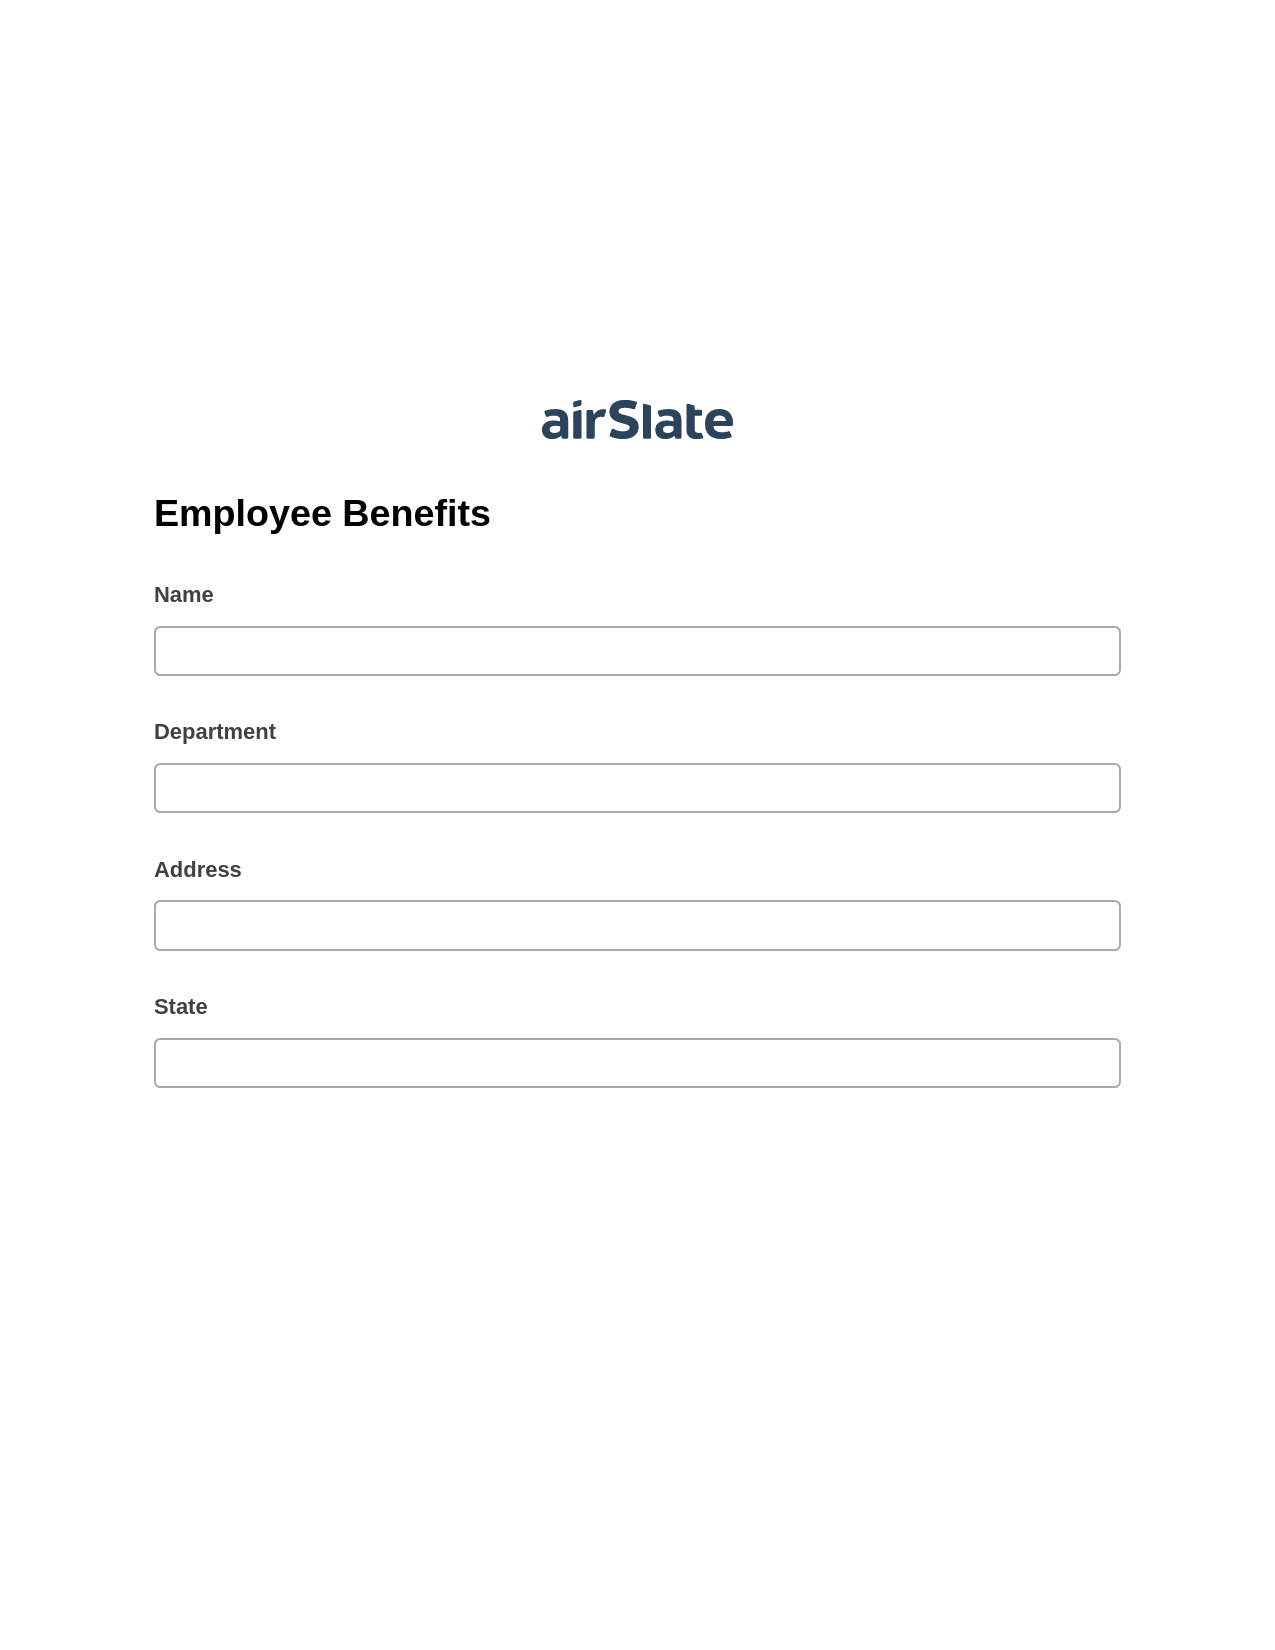 Multirole Employee Benefits Pre-fill from Salesforce Record Bot, Update Salesforce Record Bot, Export to Formstack Documents Bot